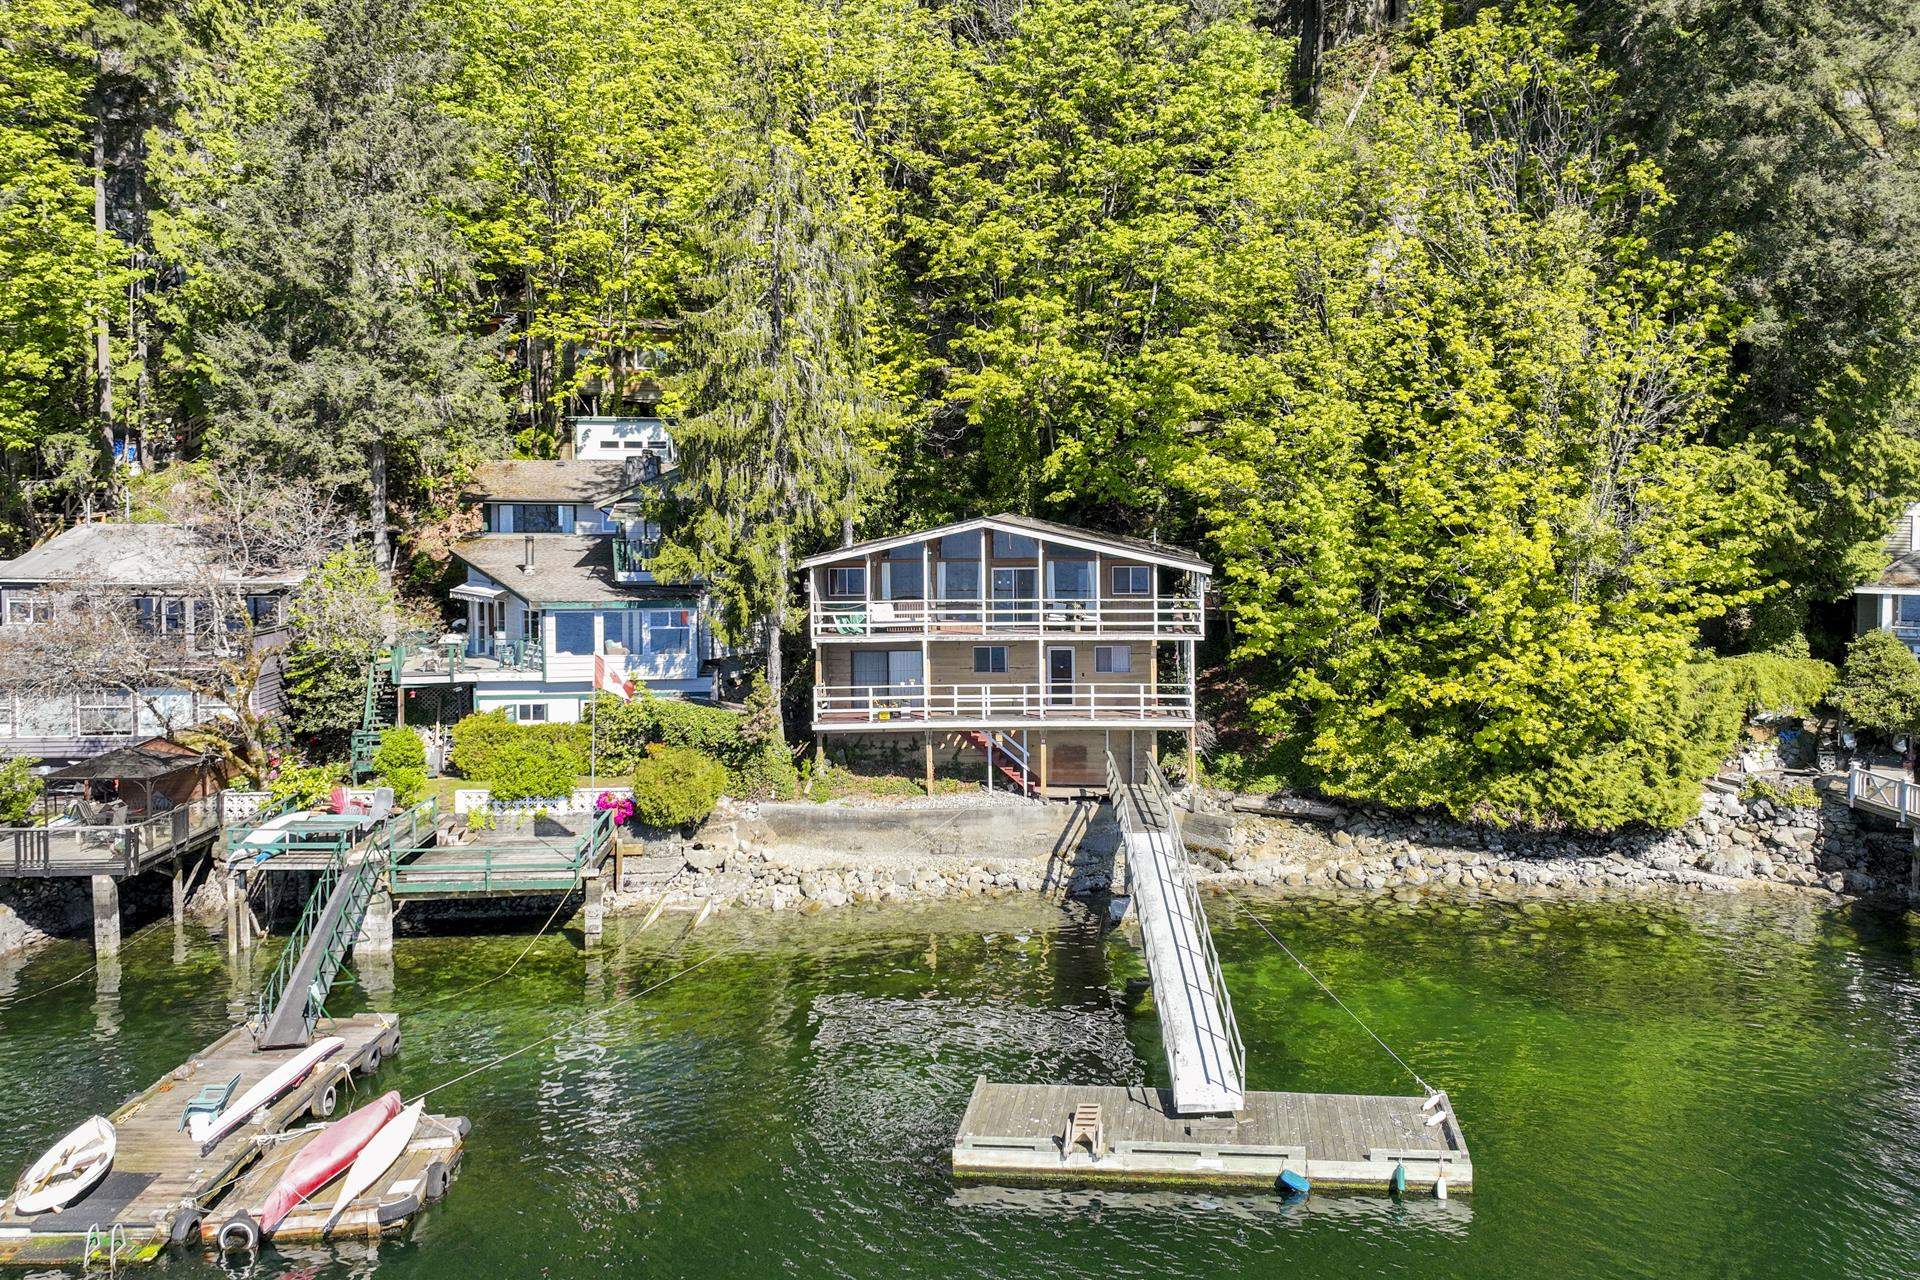 Listing image of 5672 INDIAN RIVER DRIVE